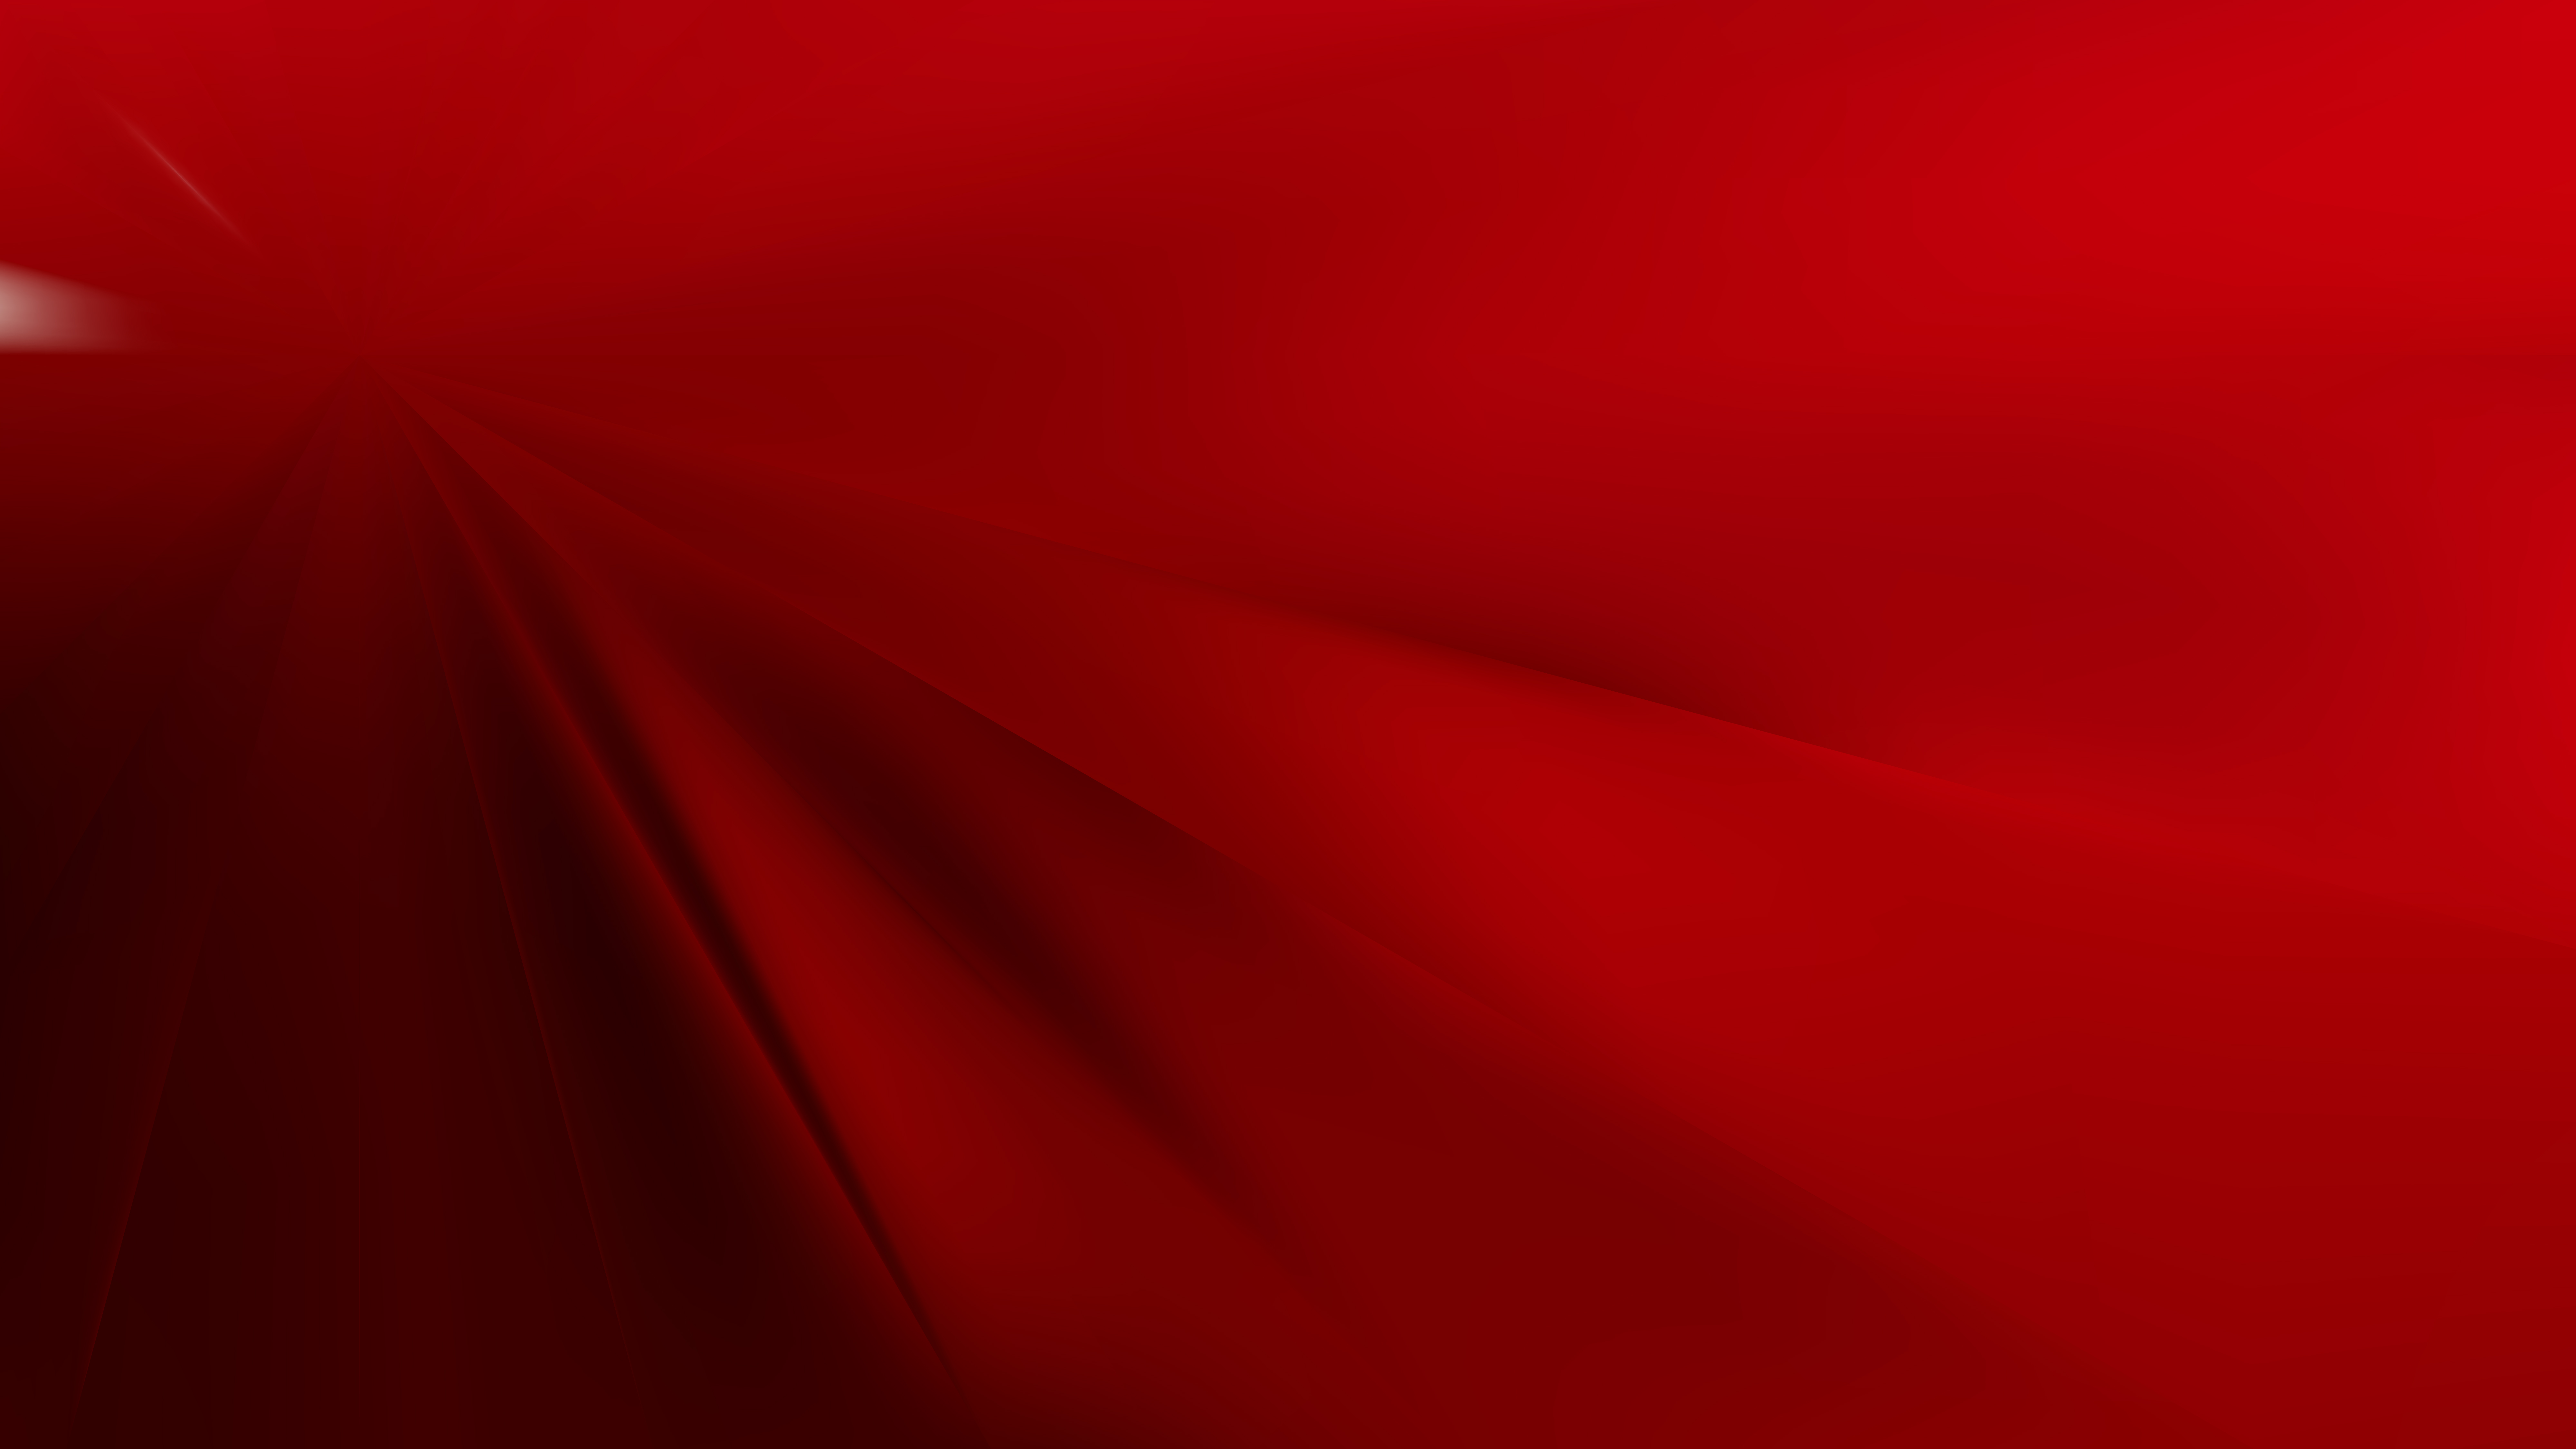 Dark Red Background Vector At Vectorified.com | Collection Of Dark Red